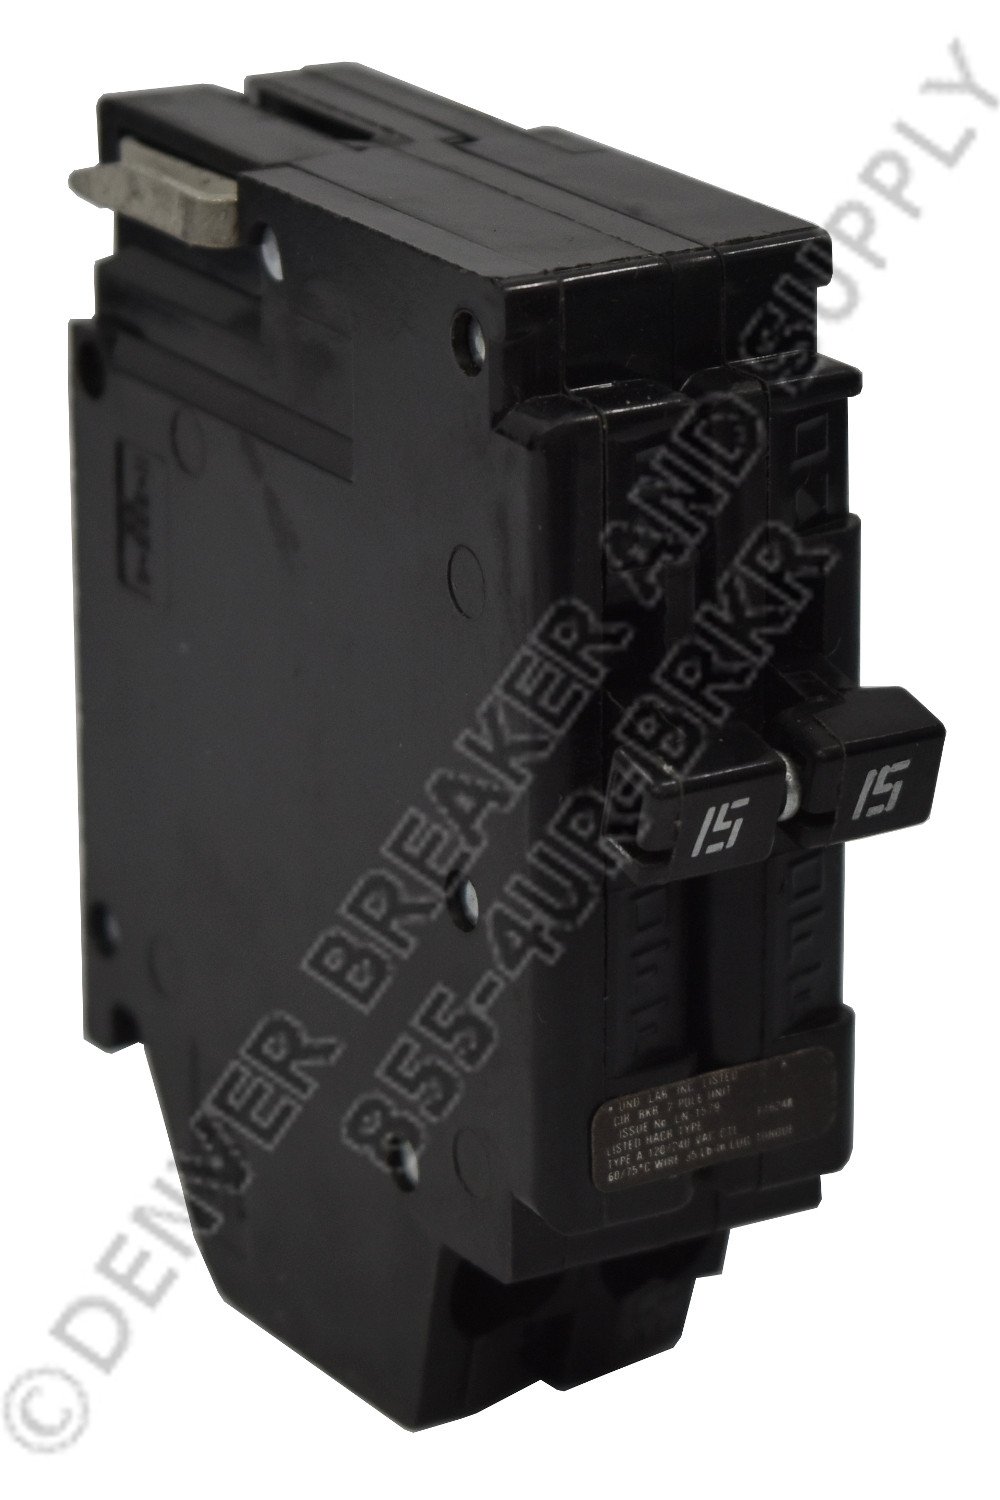 Crousehinds A215 Circuit Breaker